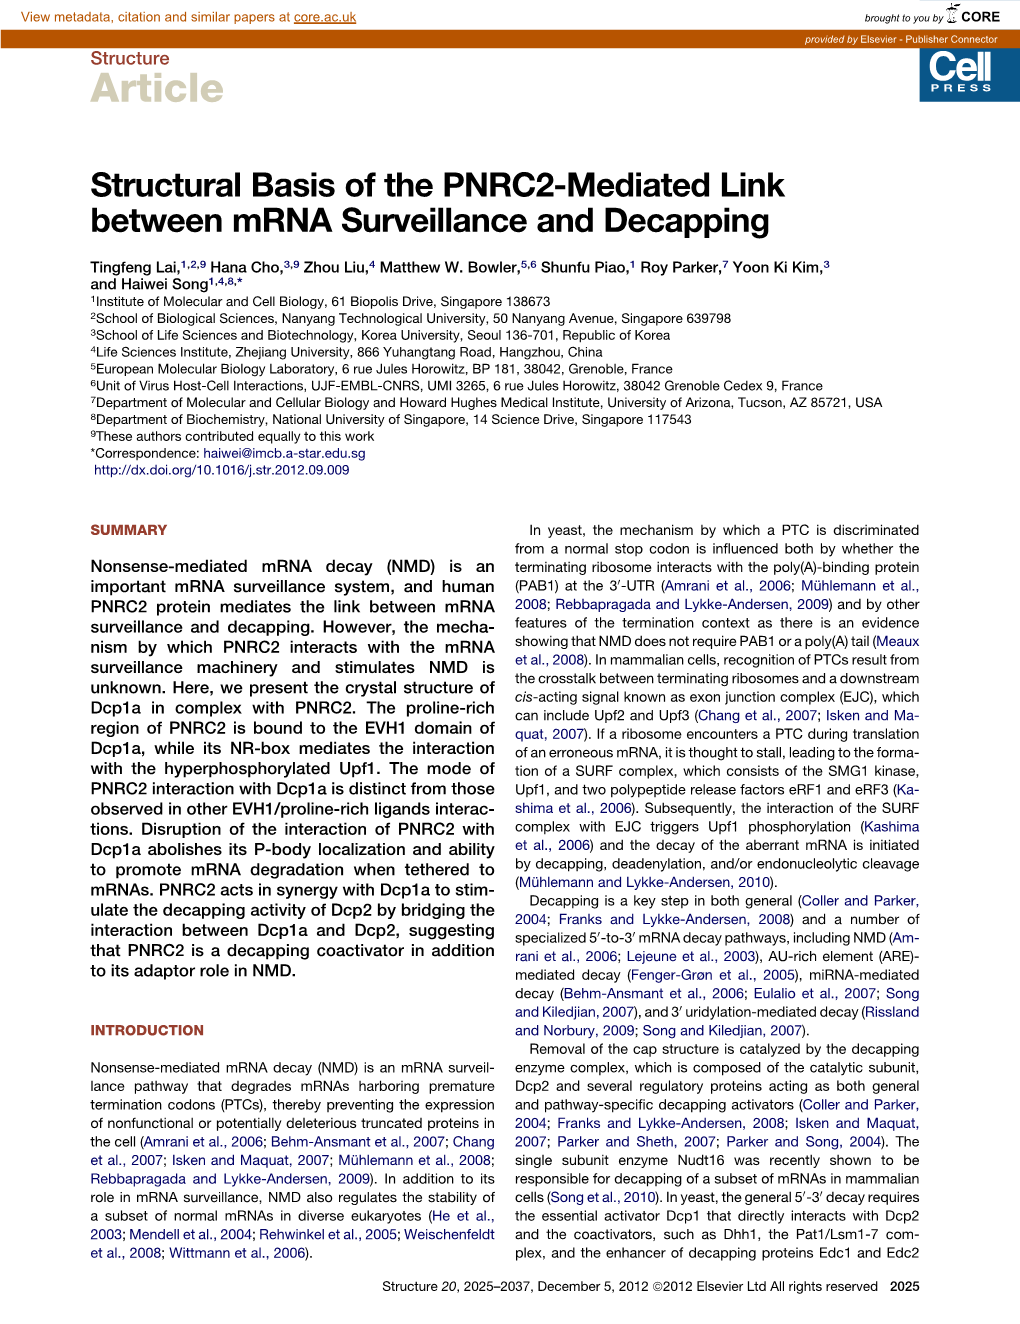 Structural Basis of the PNRC2-Mediated Link Between Mrna Surveillance and Decapping